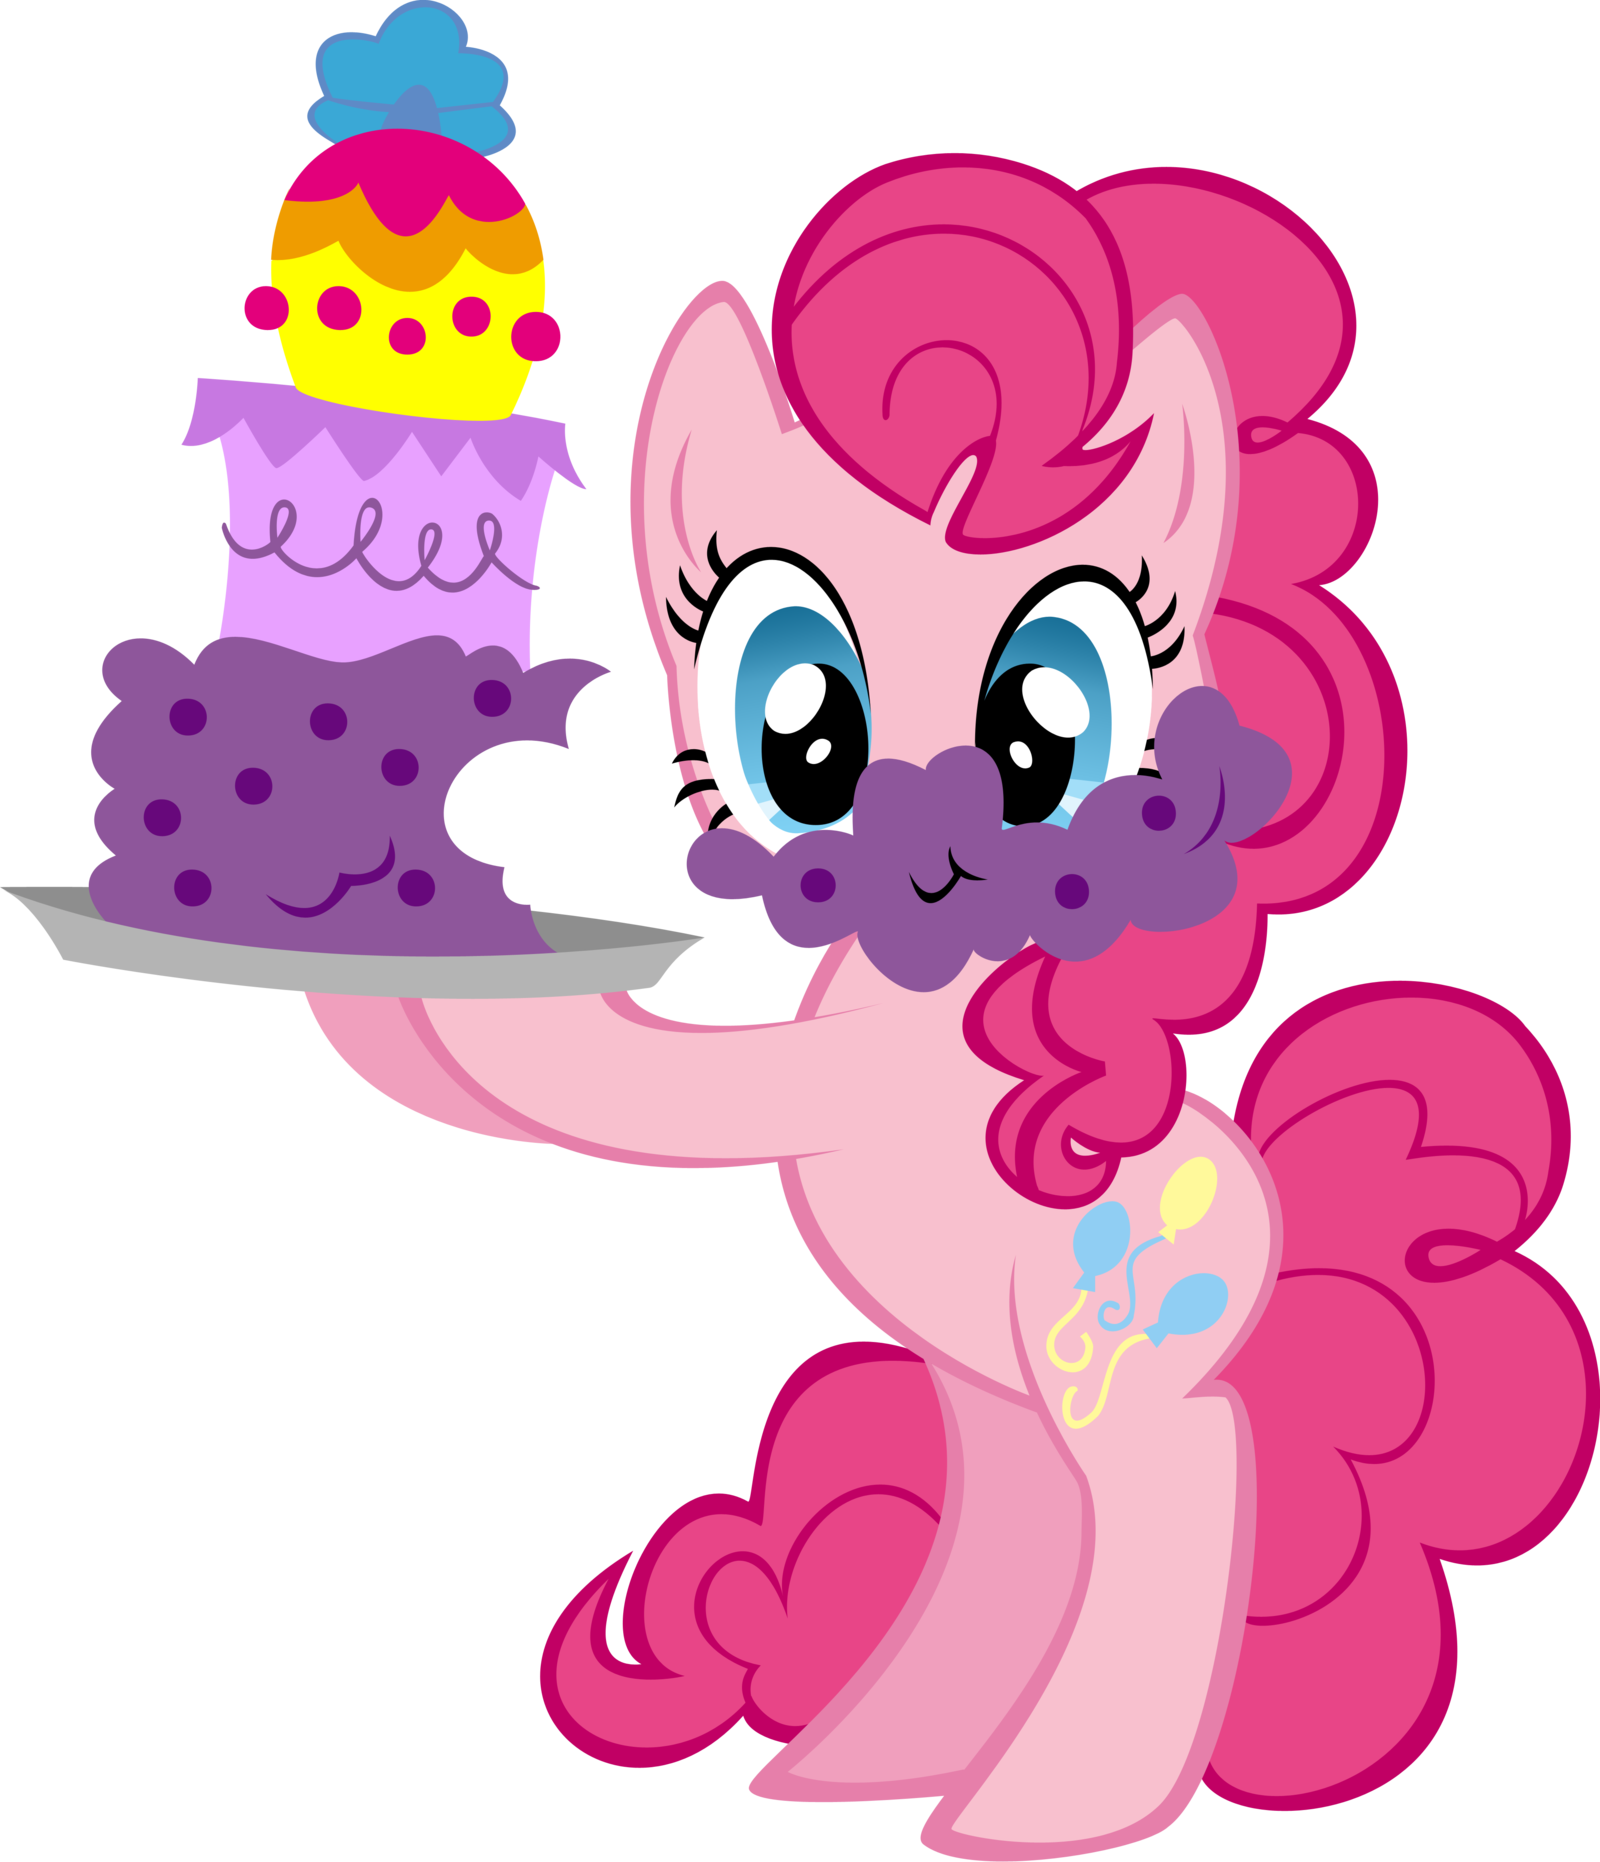 Pinkie's special Cake - Donation